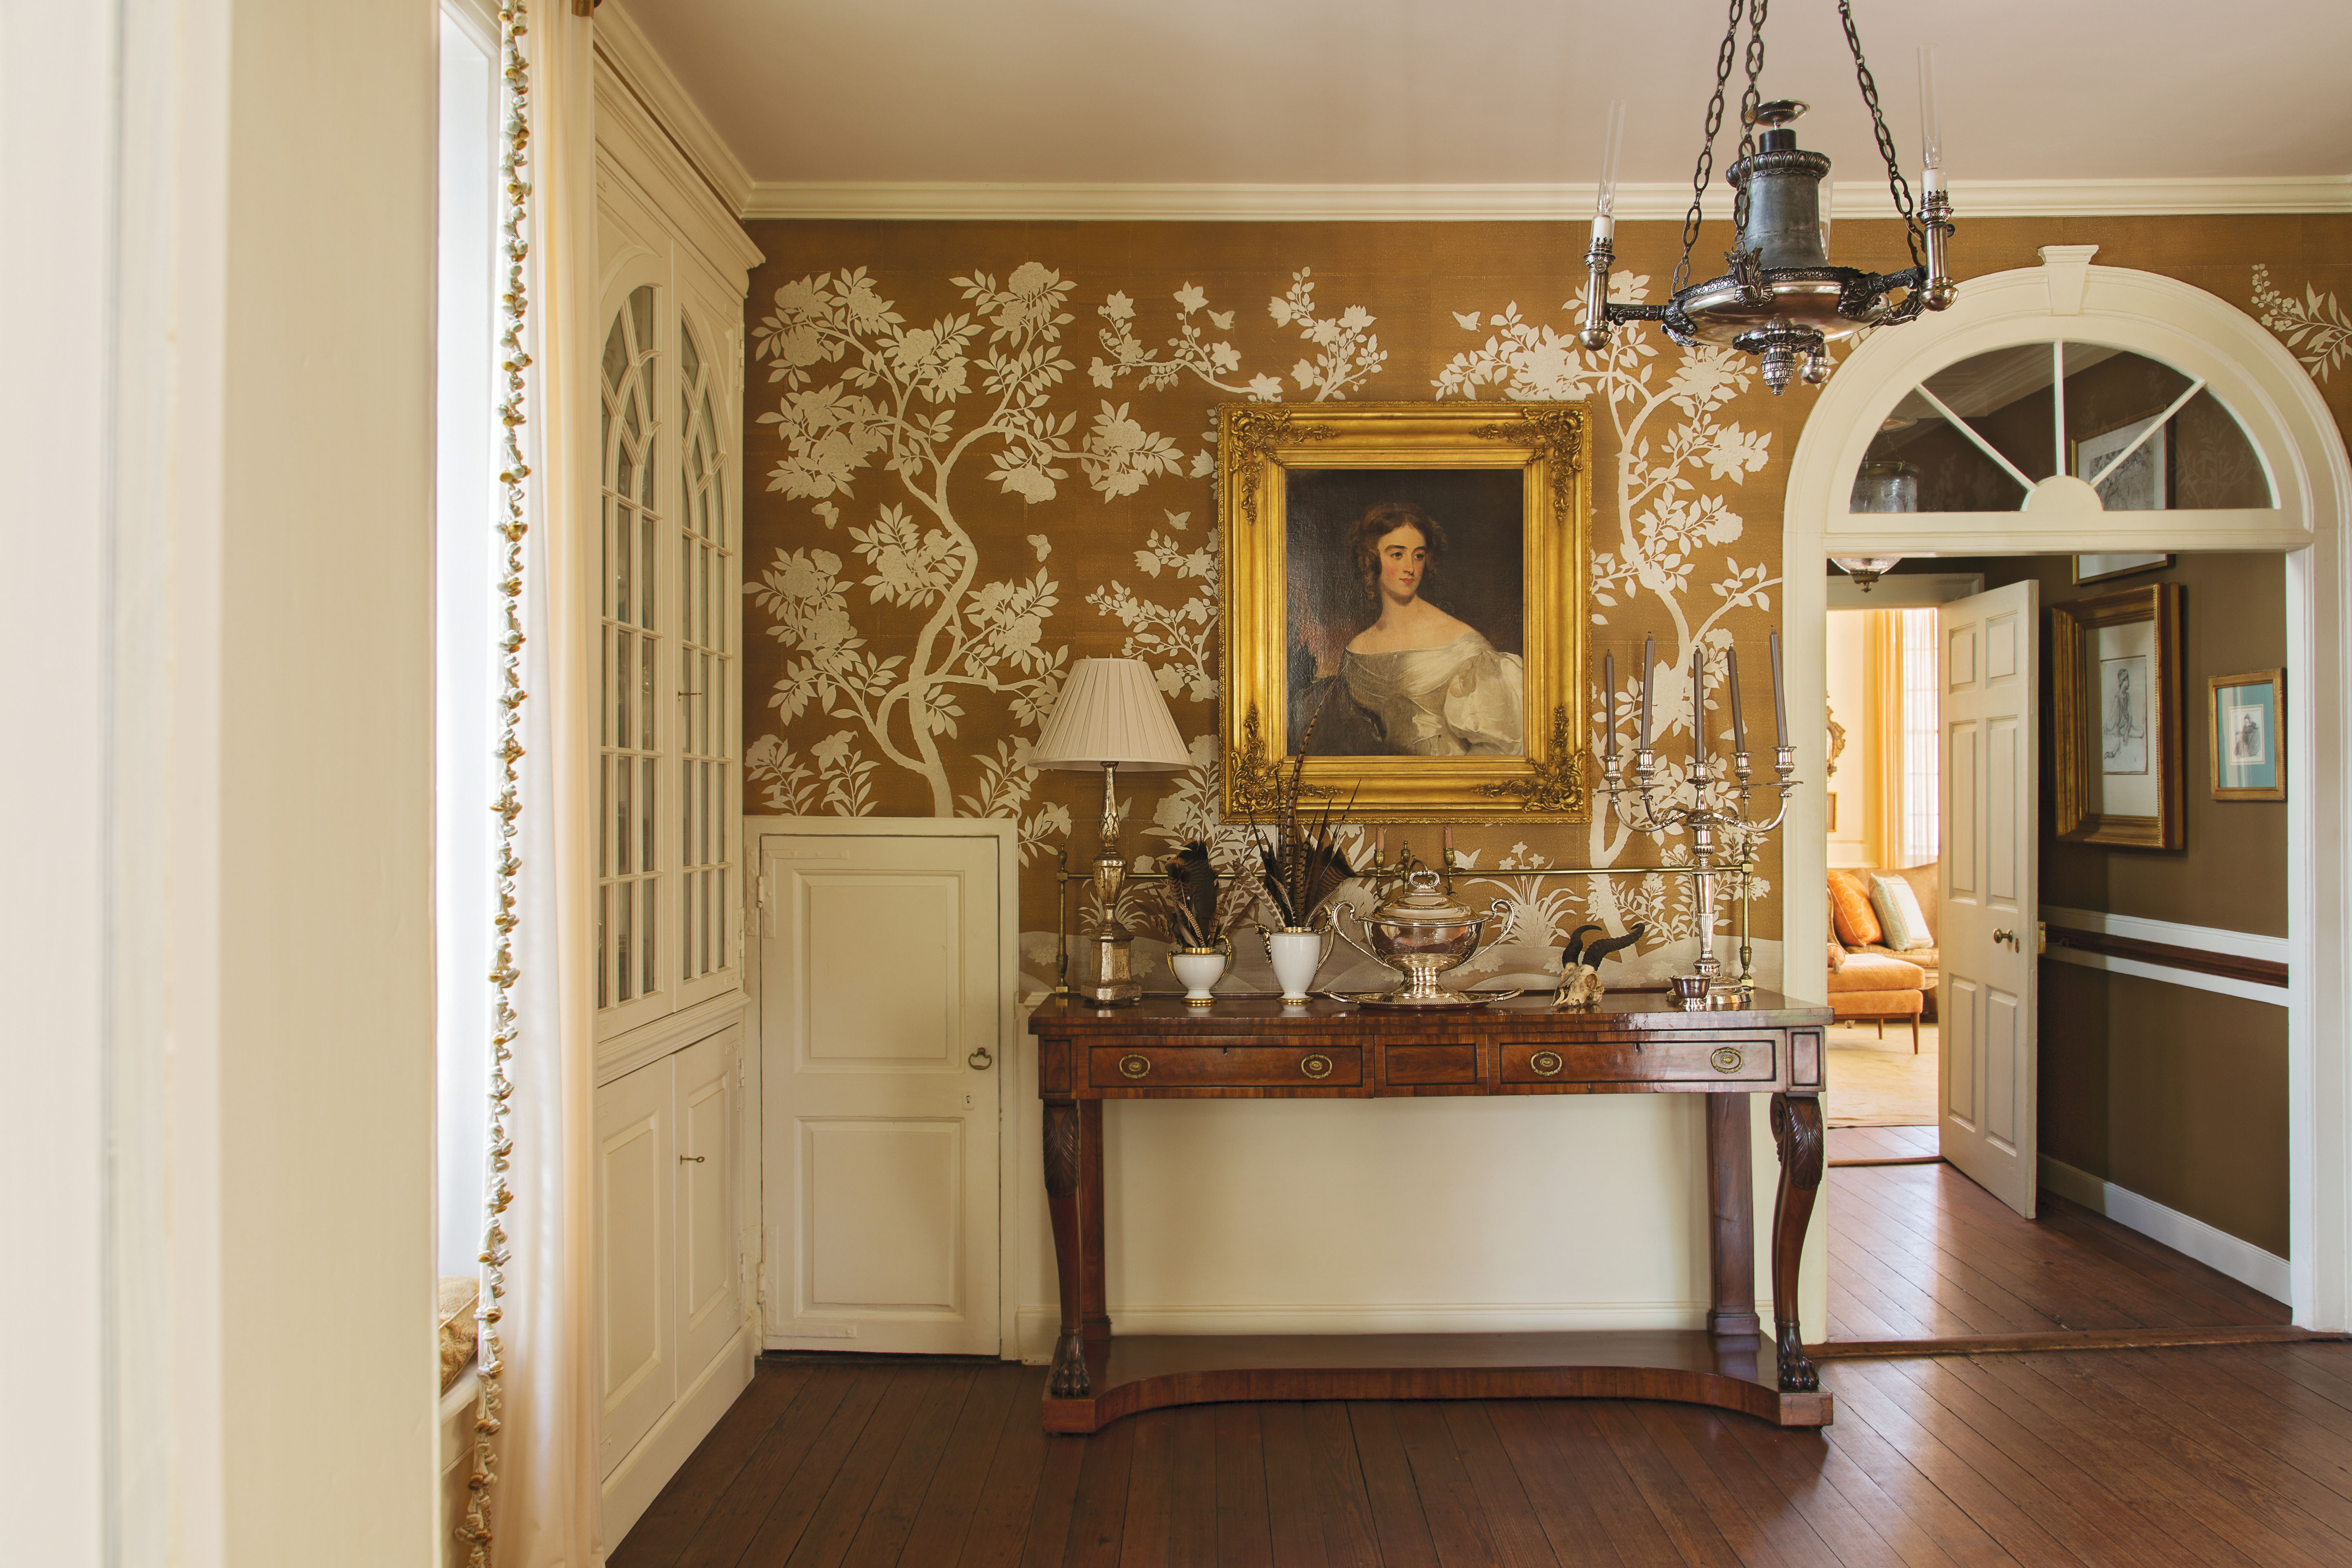 In the butler’s pantry, hand-painted Gracie wallpaper complements a portrait of Mary Roane Ritchie Green by 19th-century master portrait artist Thomas Sully, who completed more than 2,000 works of wealthy patrons and politicians.